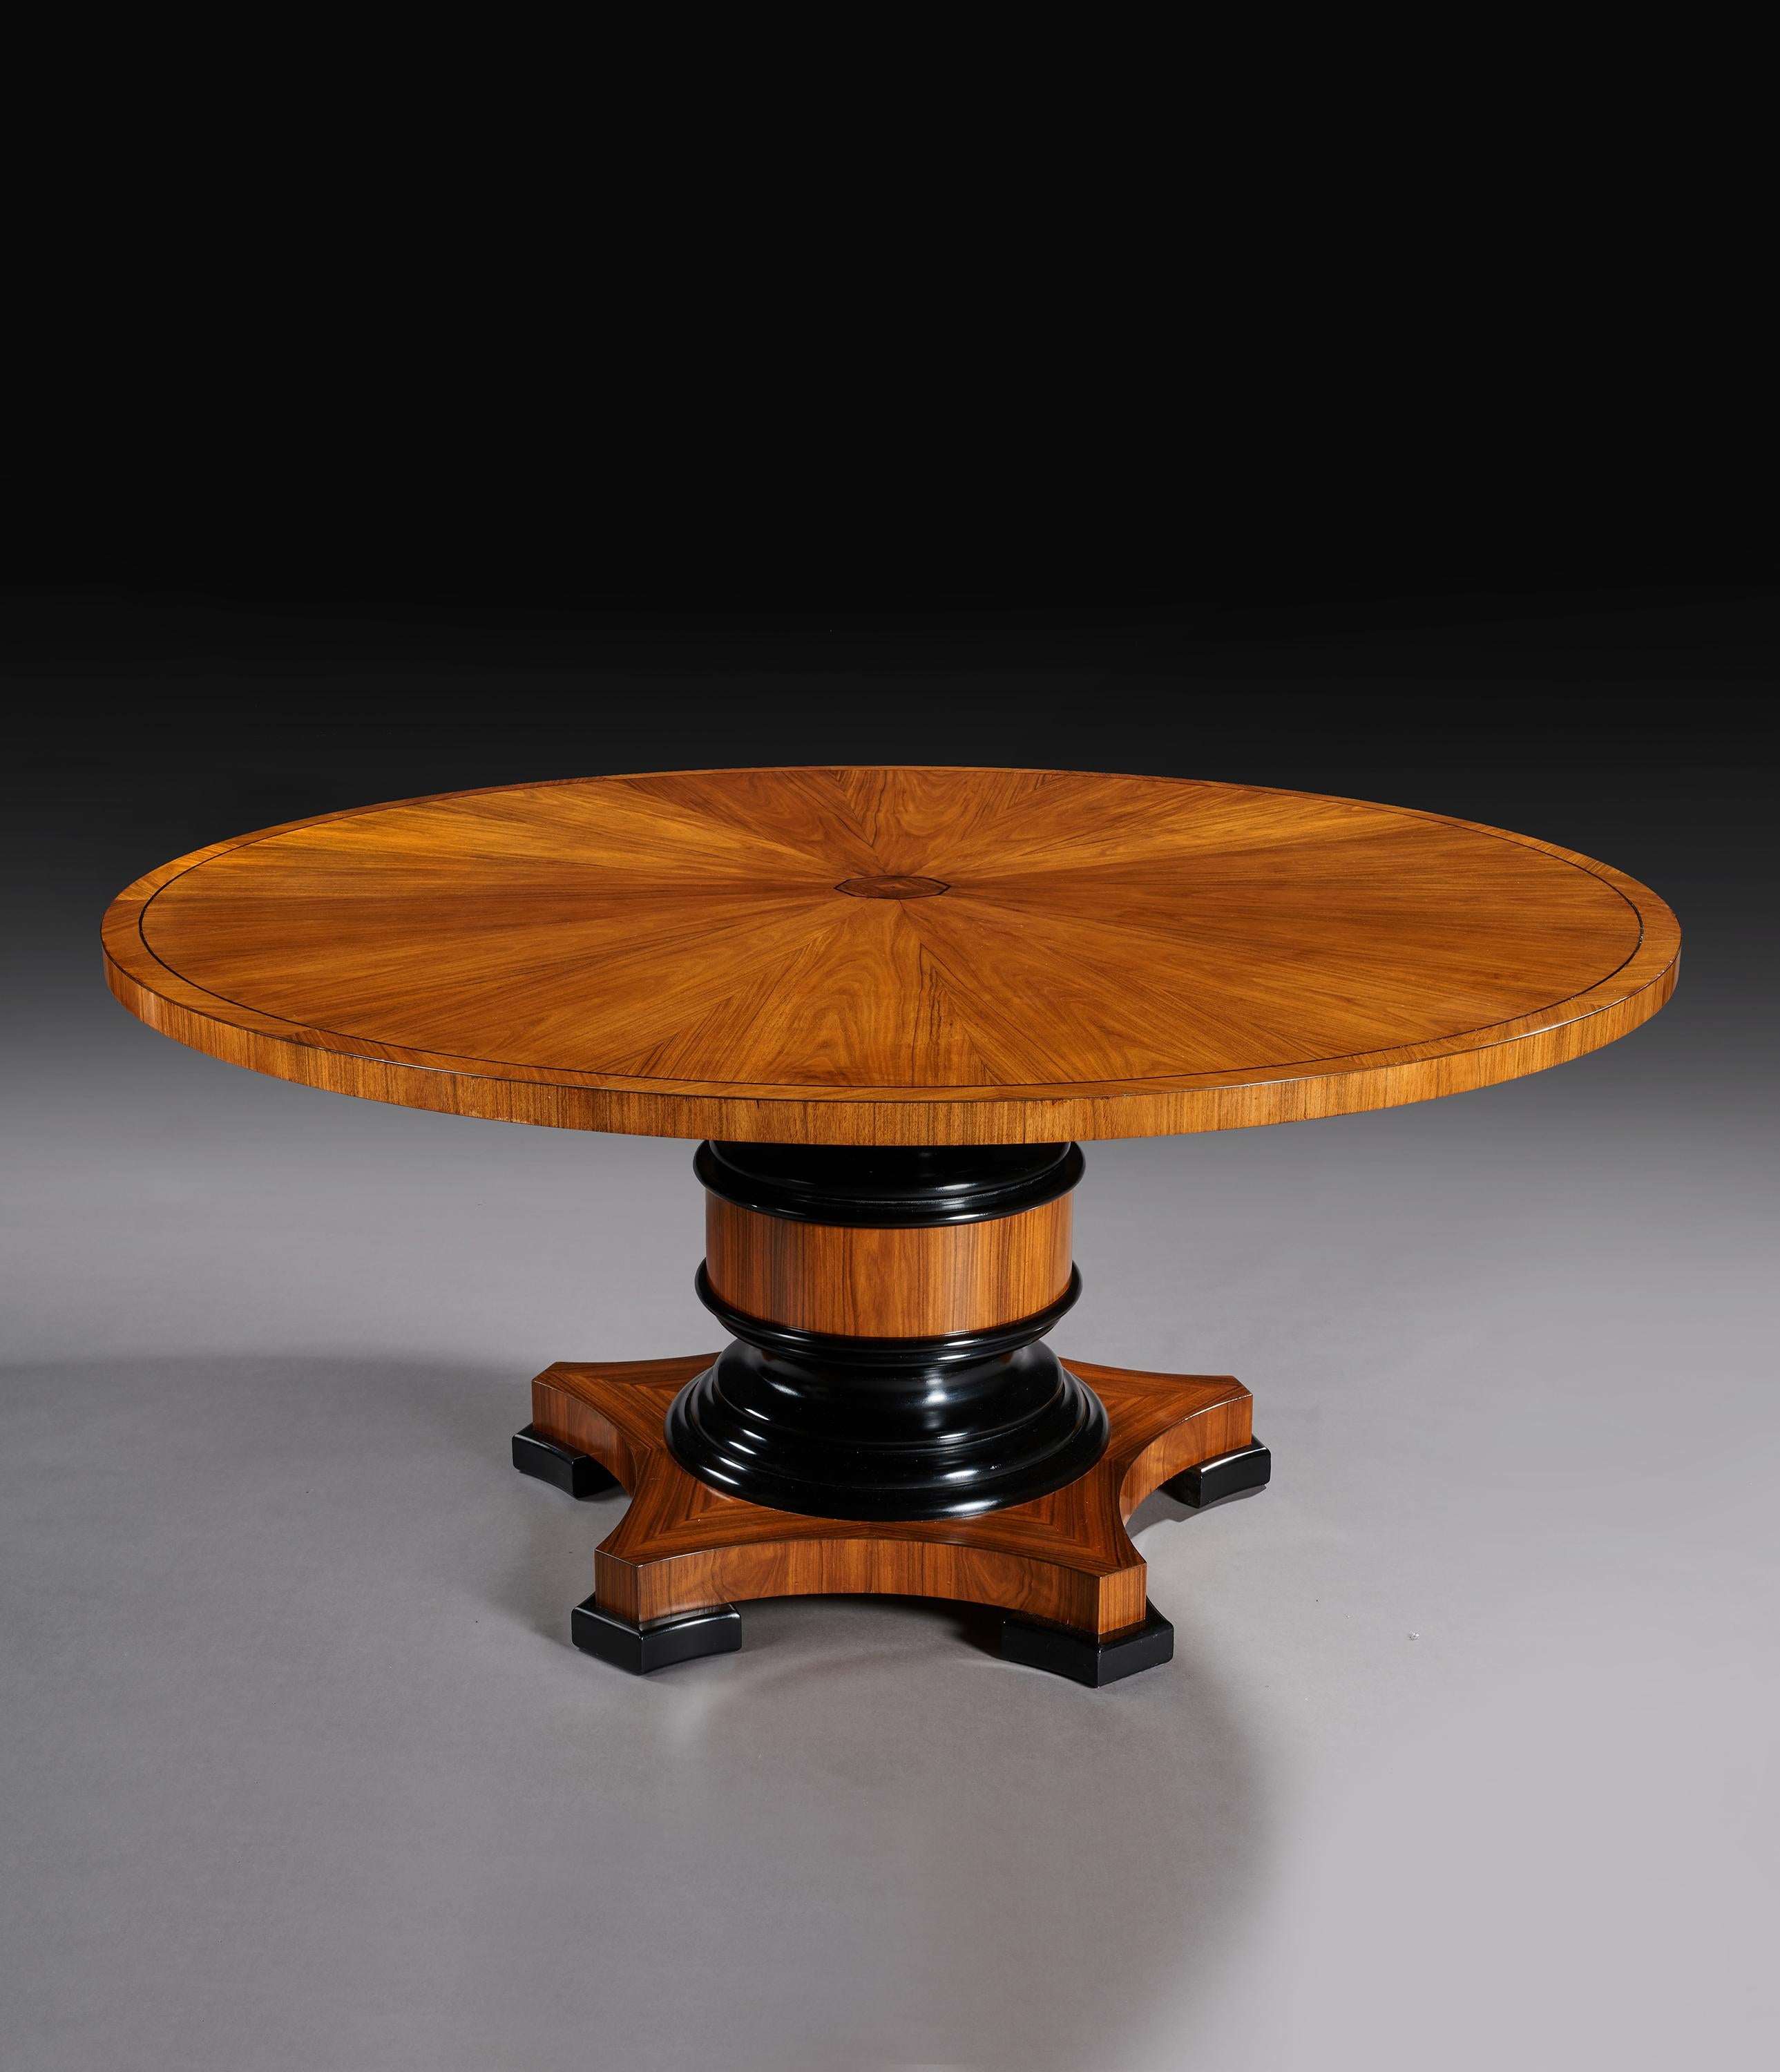 Very good quality bespoke made 5 1/2 foot olive wood veneered and ebony inlaid circular dining table.

English, late 20th century.

Extremely good quality, this English bespoke made large circular dining table has a diameter of 66 inches or 5